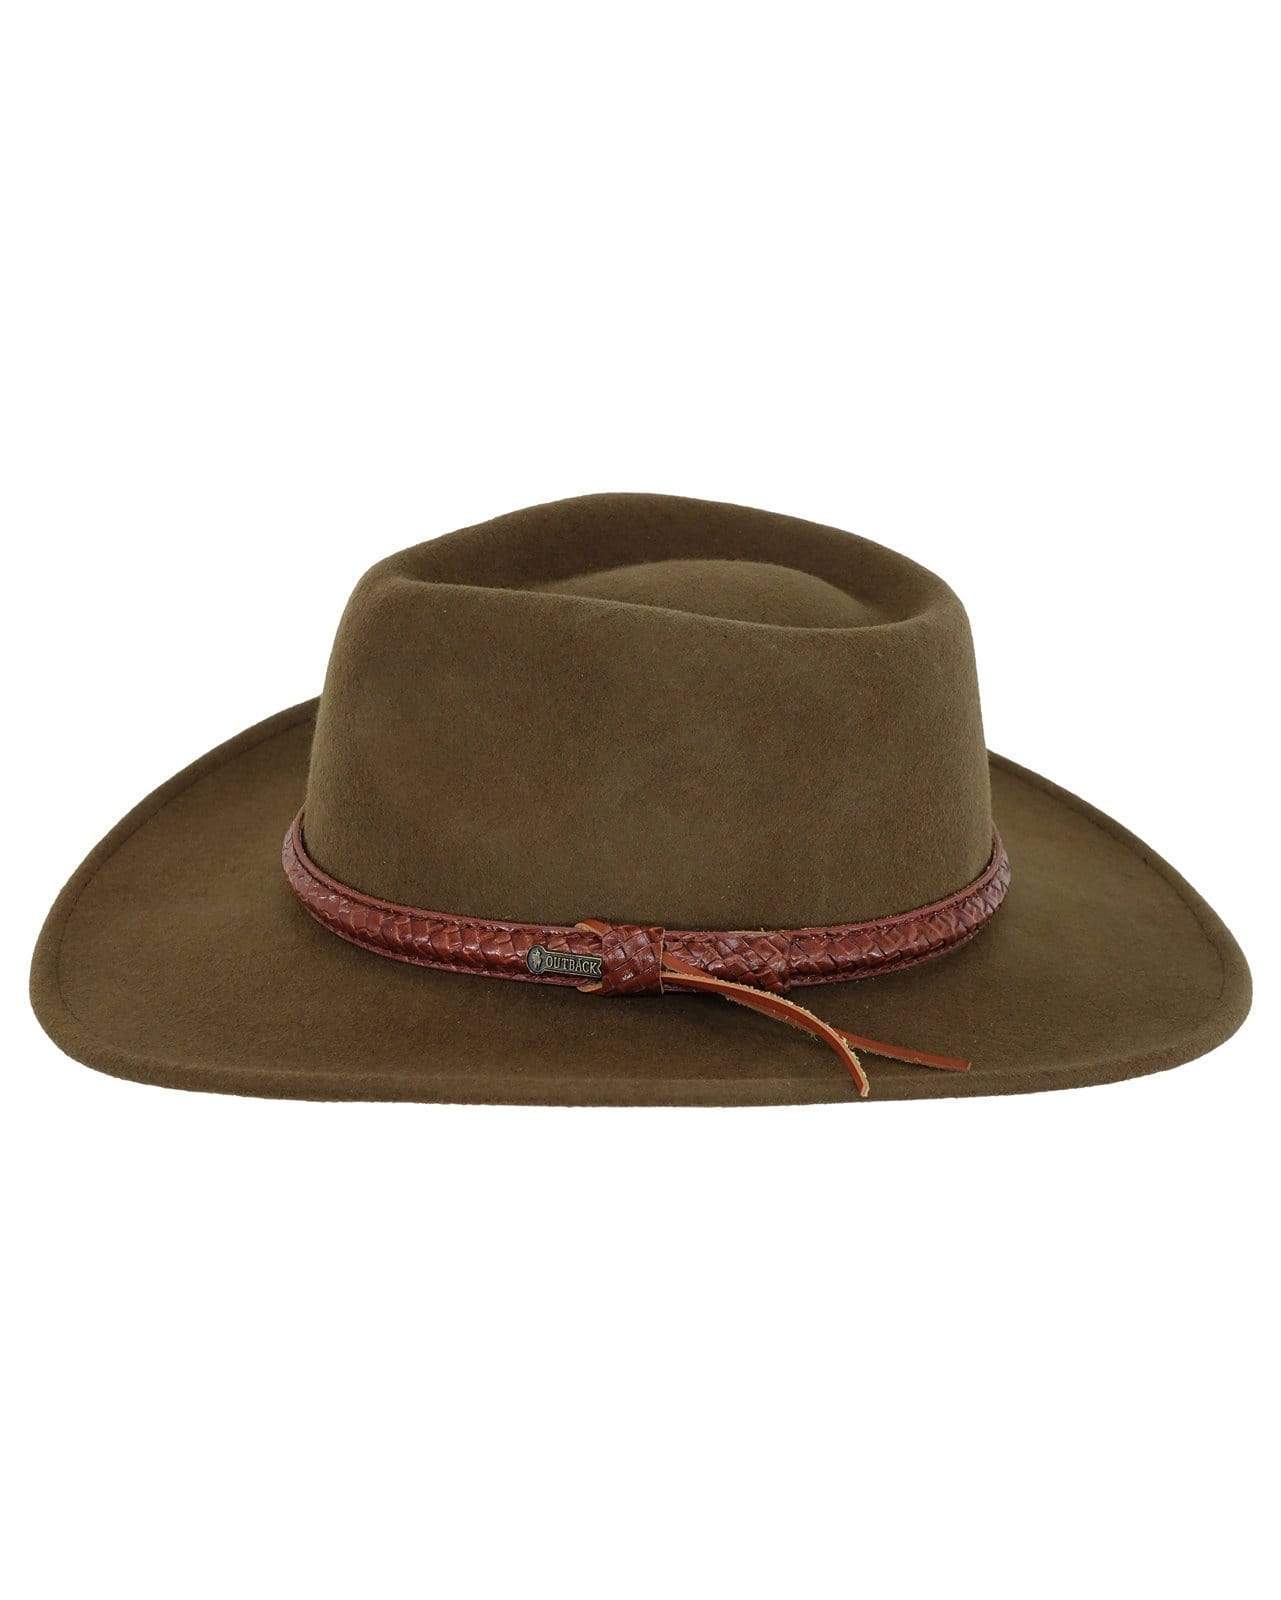 Outback Trading Company Dusty Rider Hats